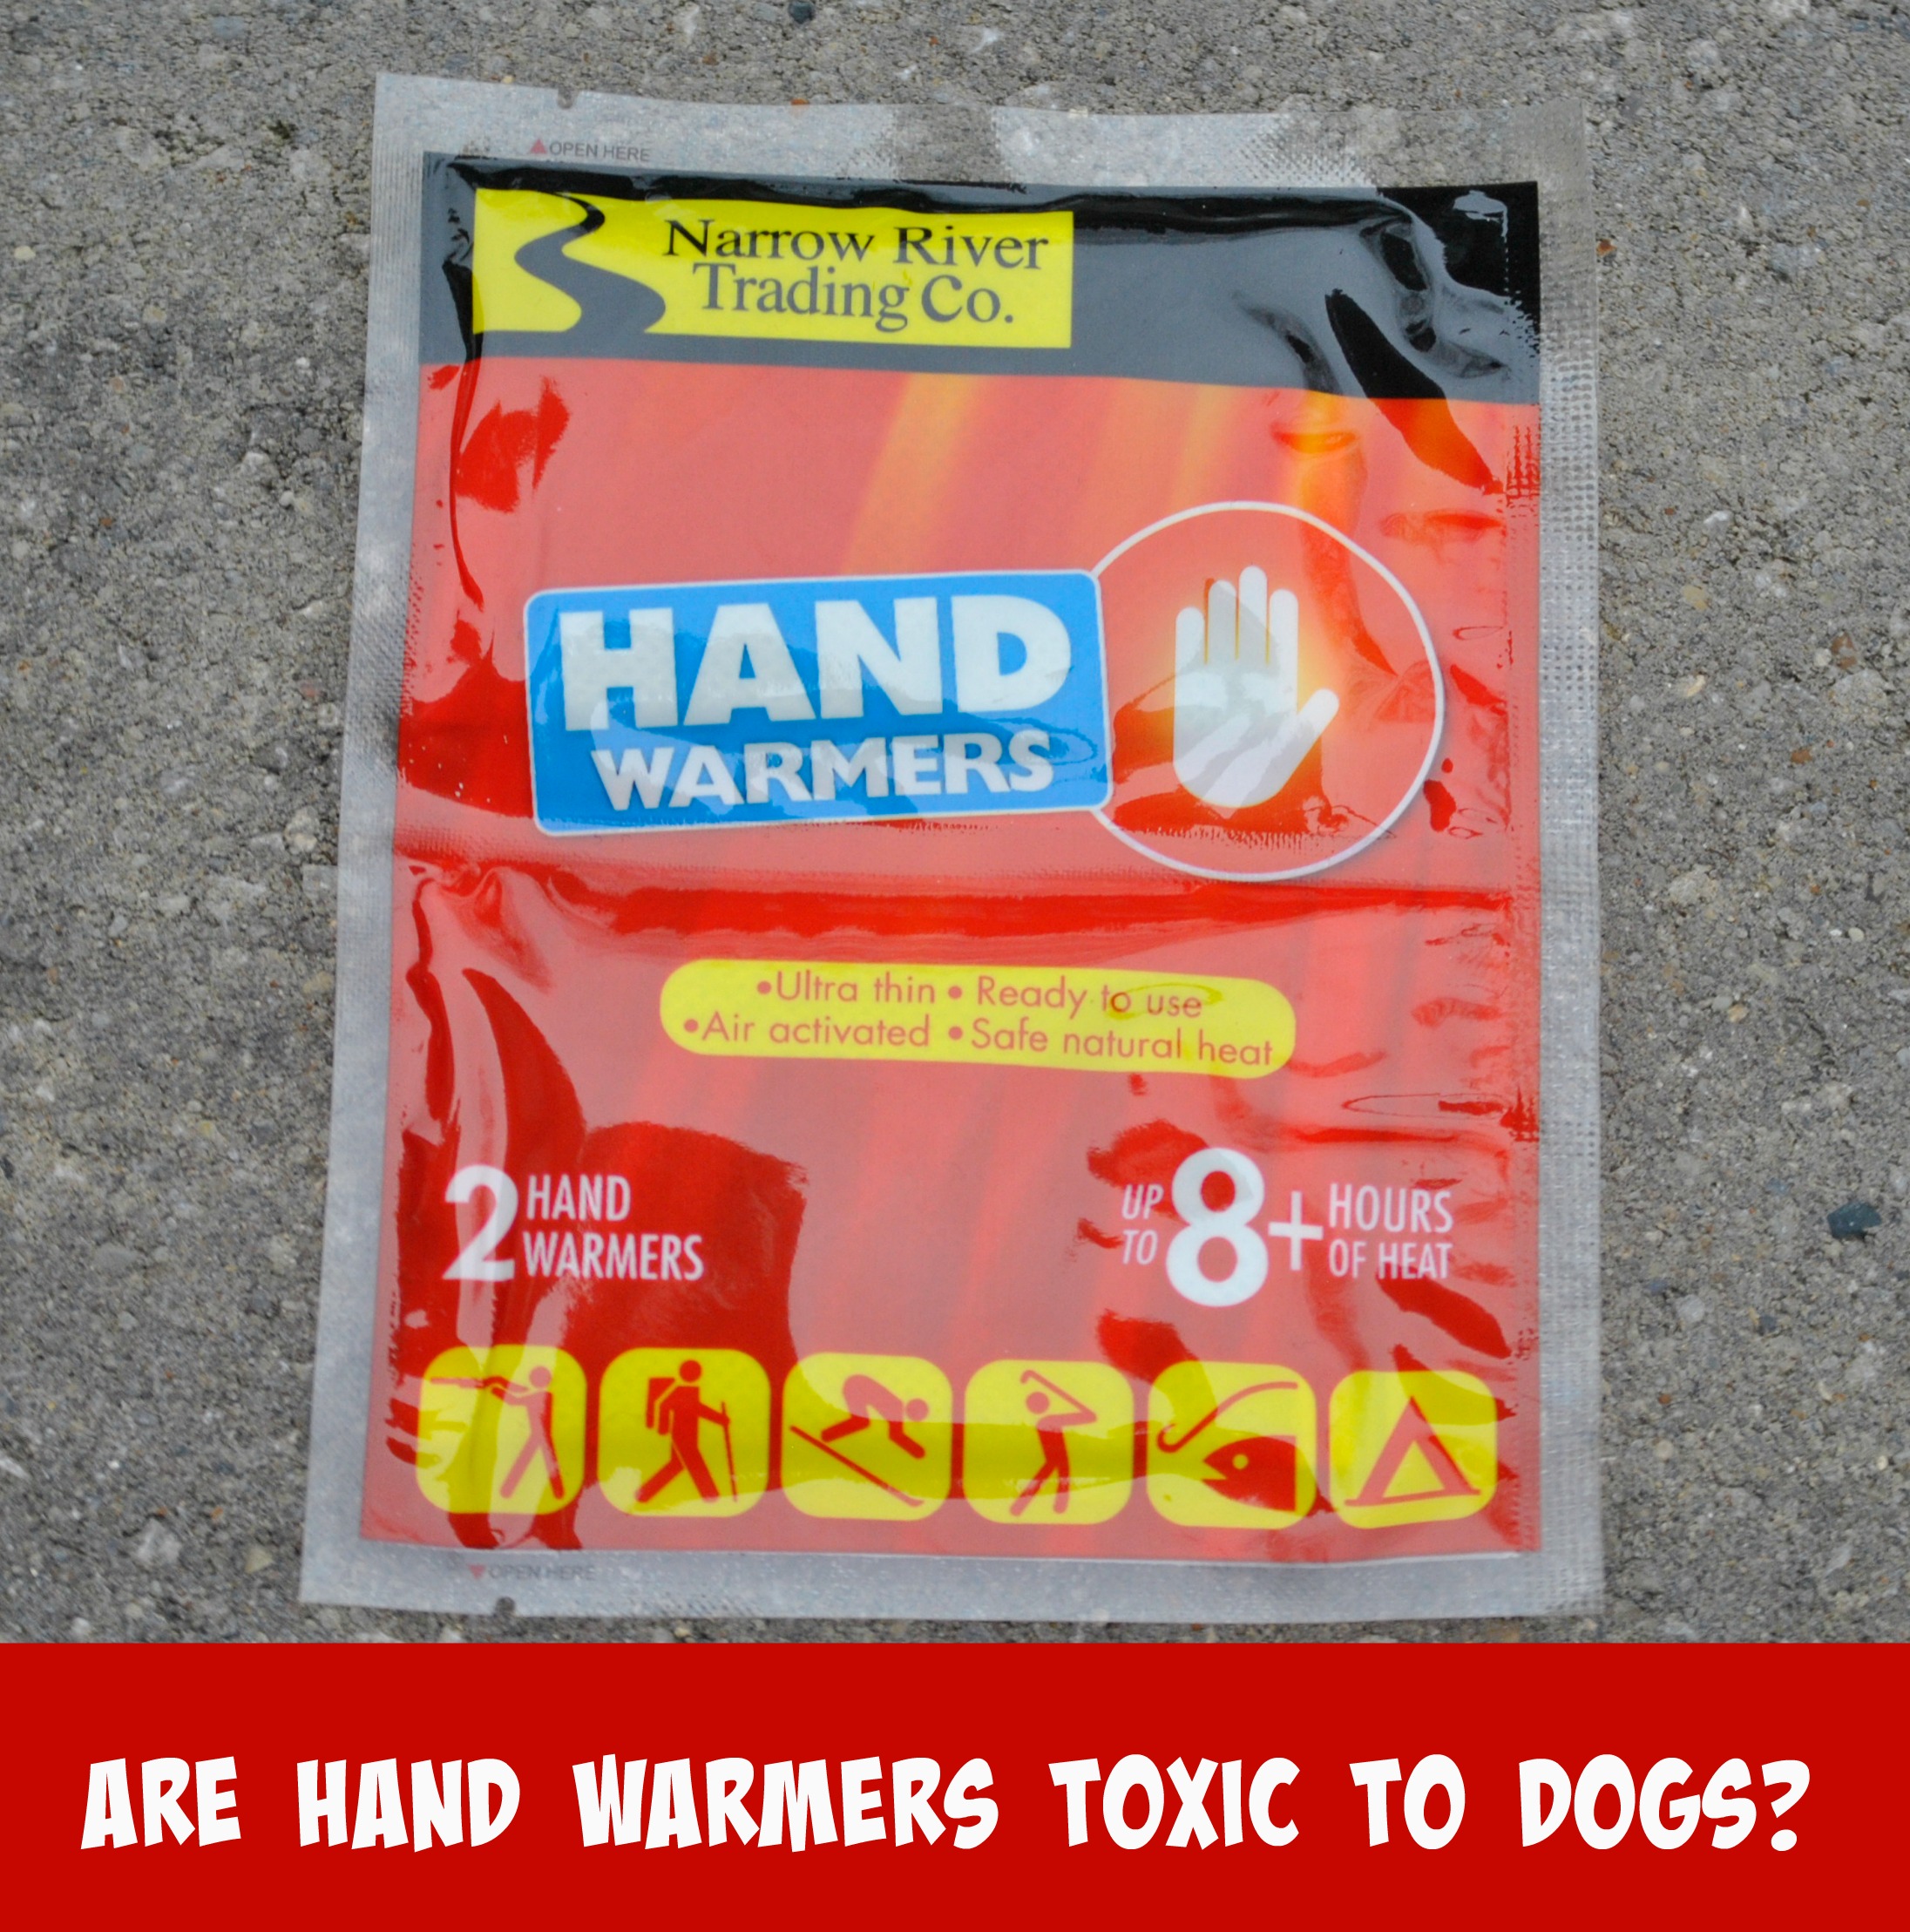 Are Hand Warmers Toxic To Dogs? - My Brown Newfies